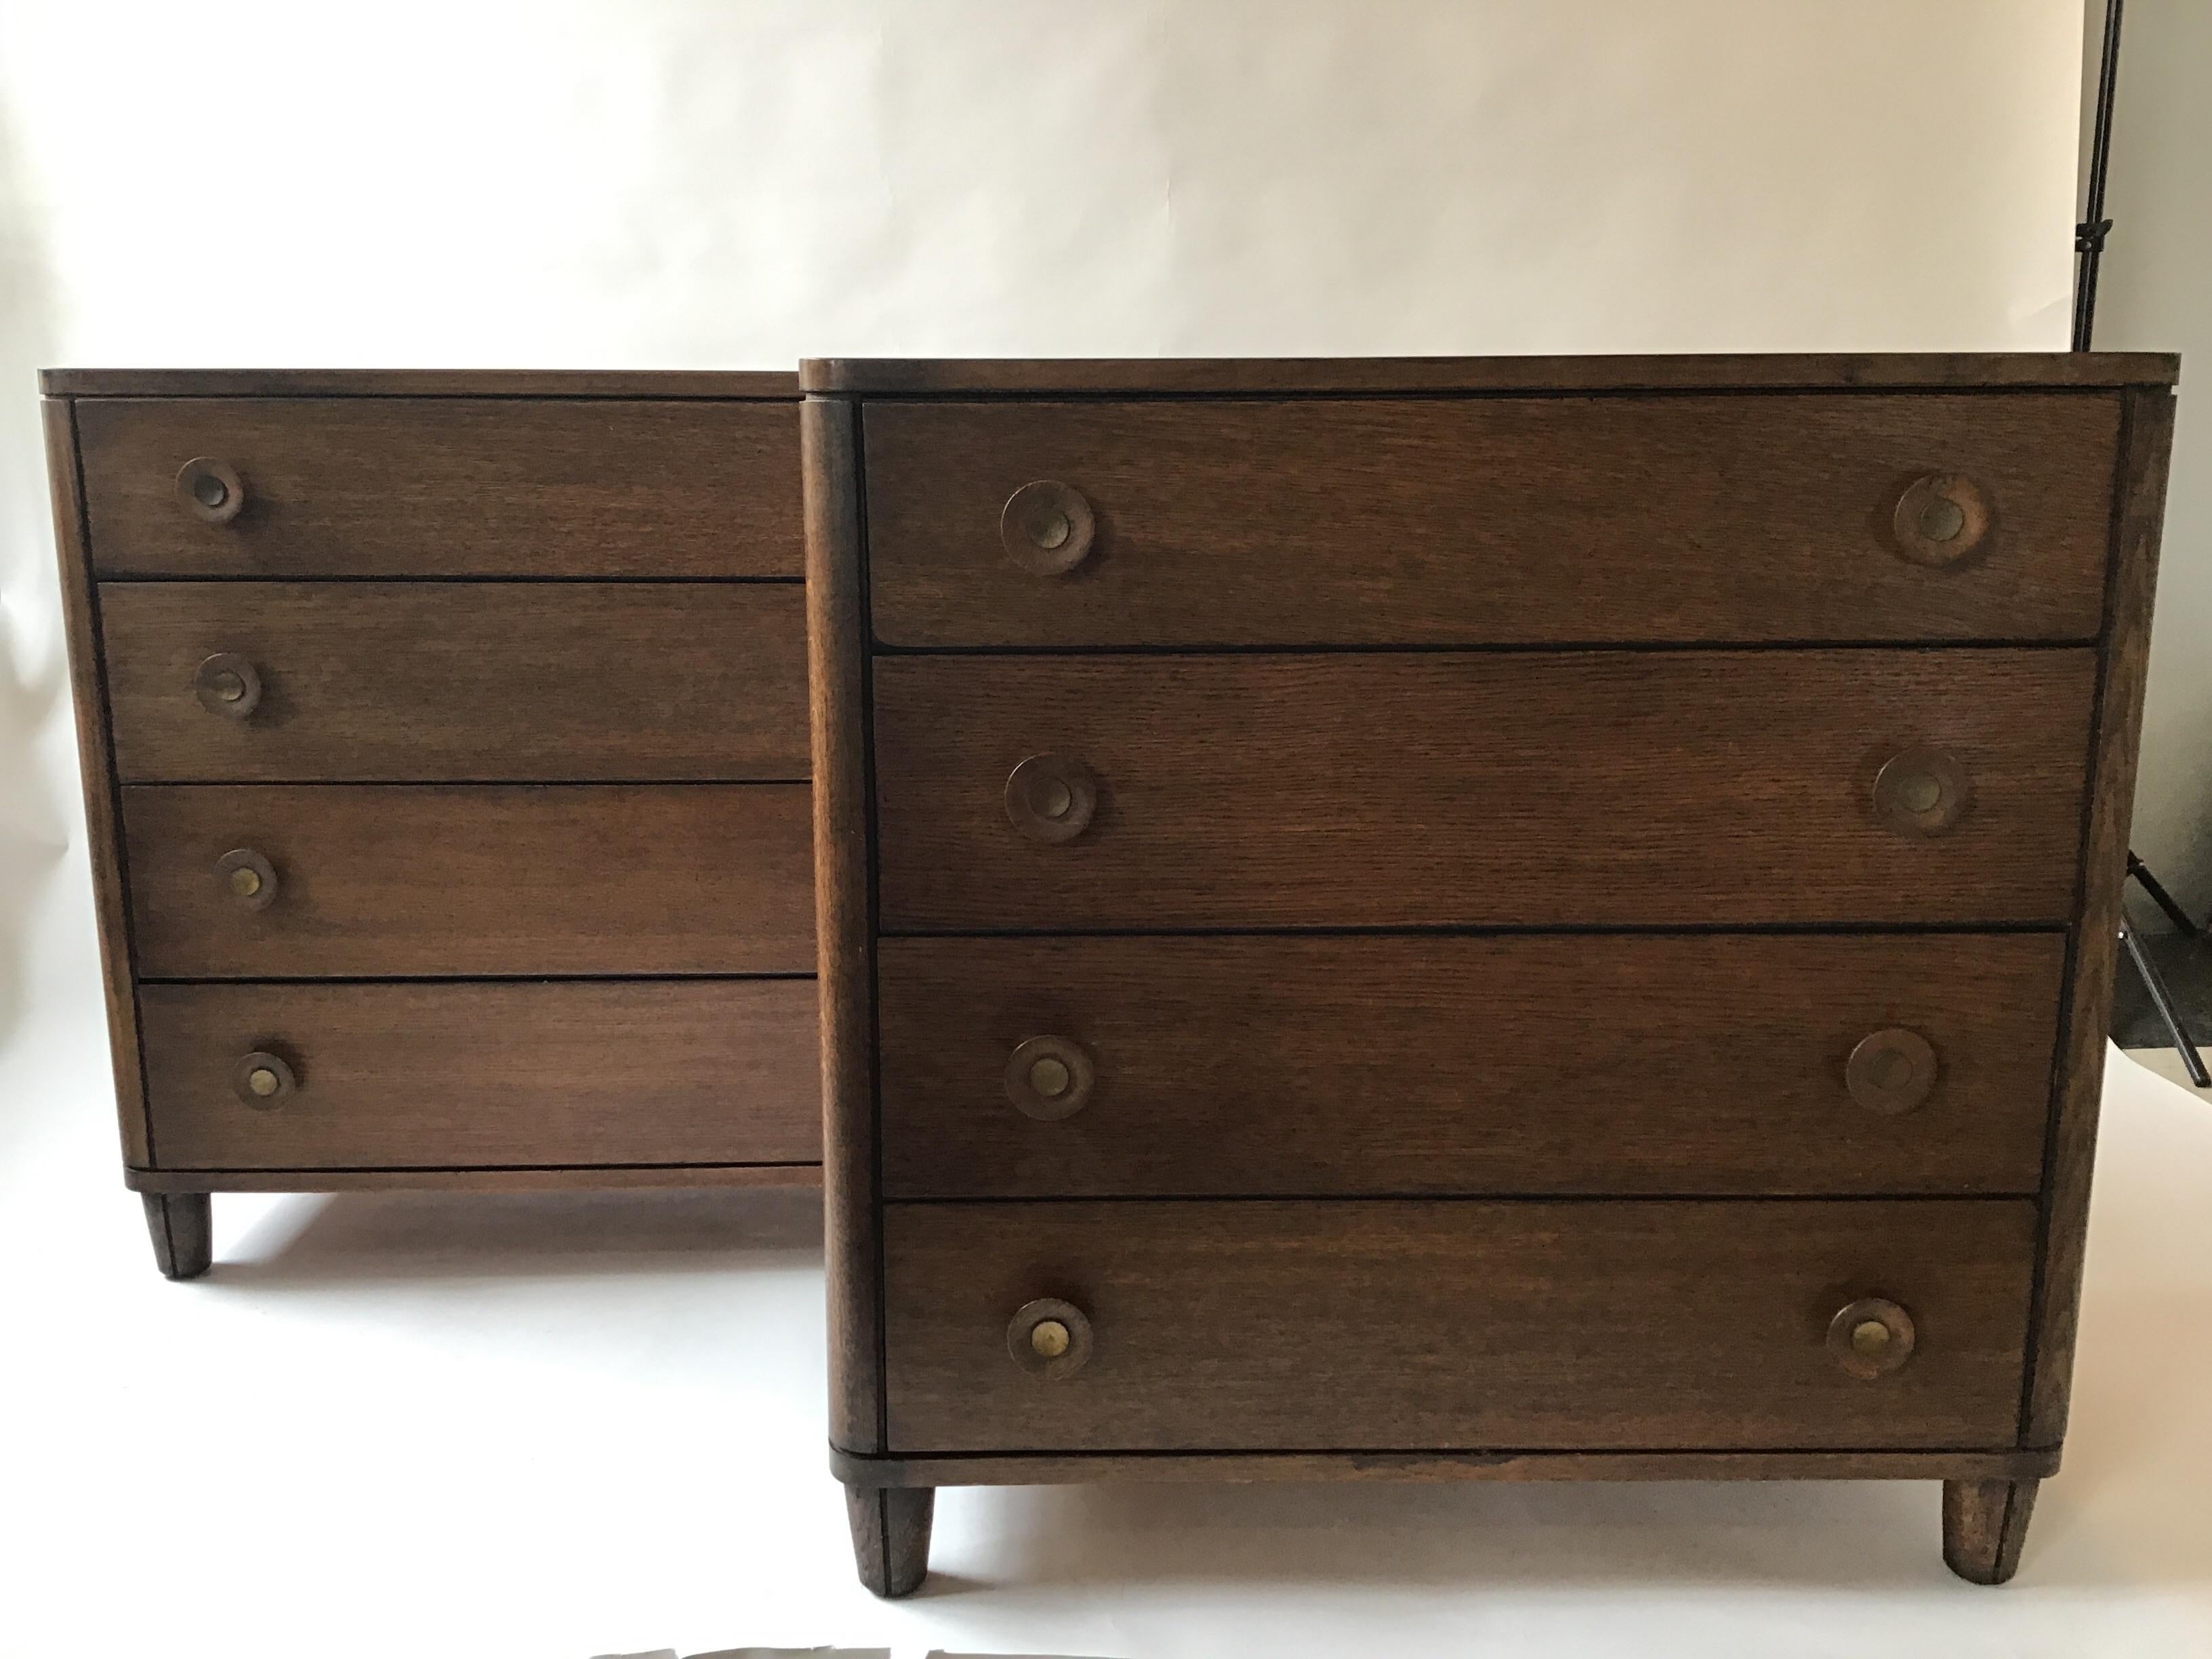 Pair of Raymond Loewy chests for Mengel. Great hardware!